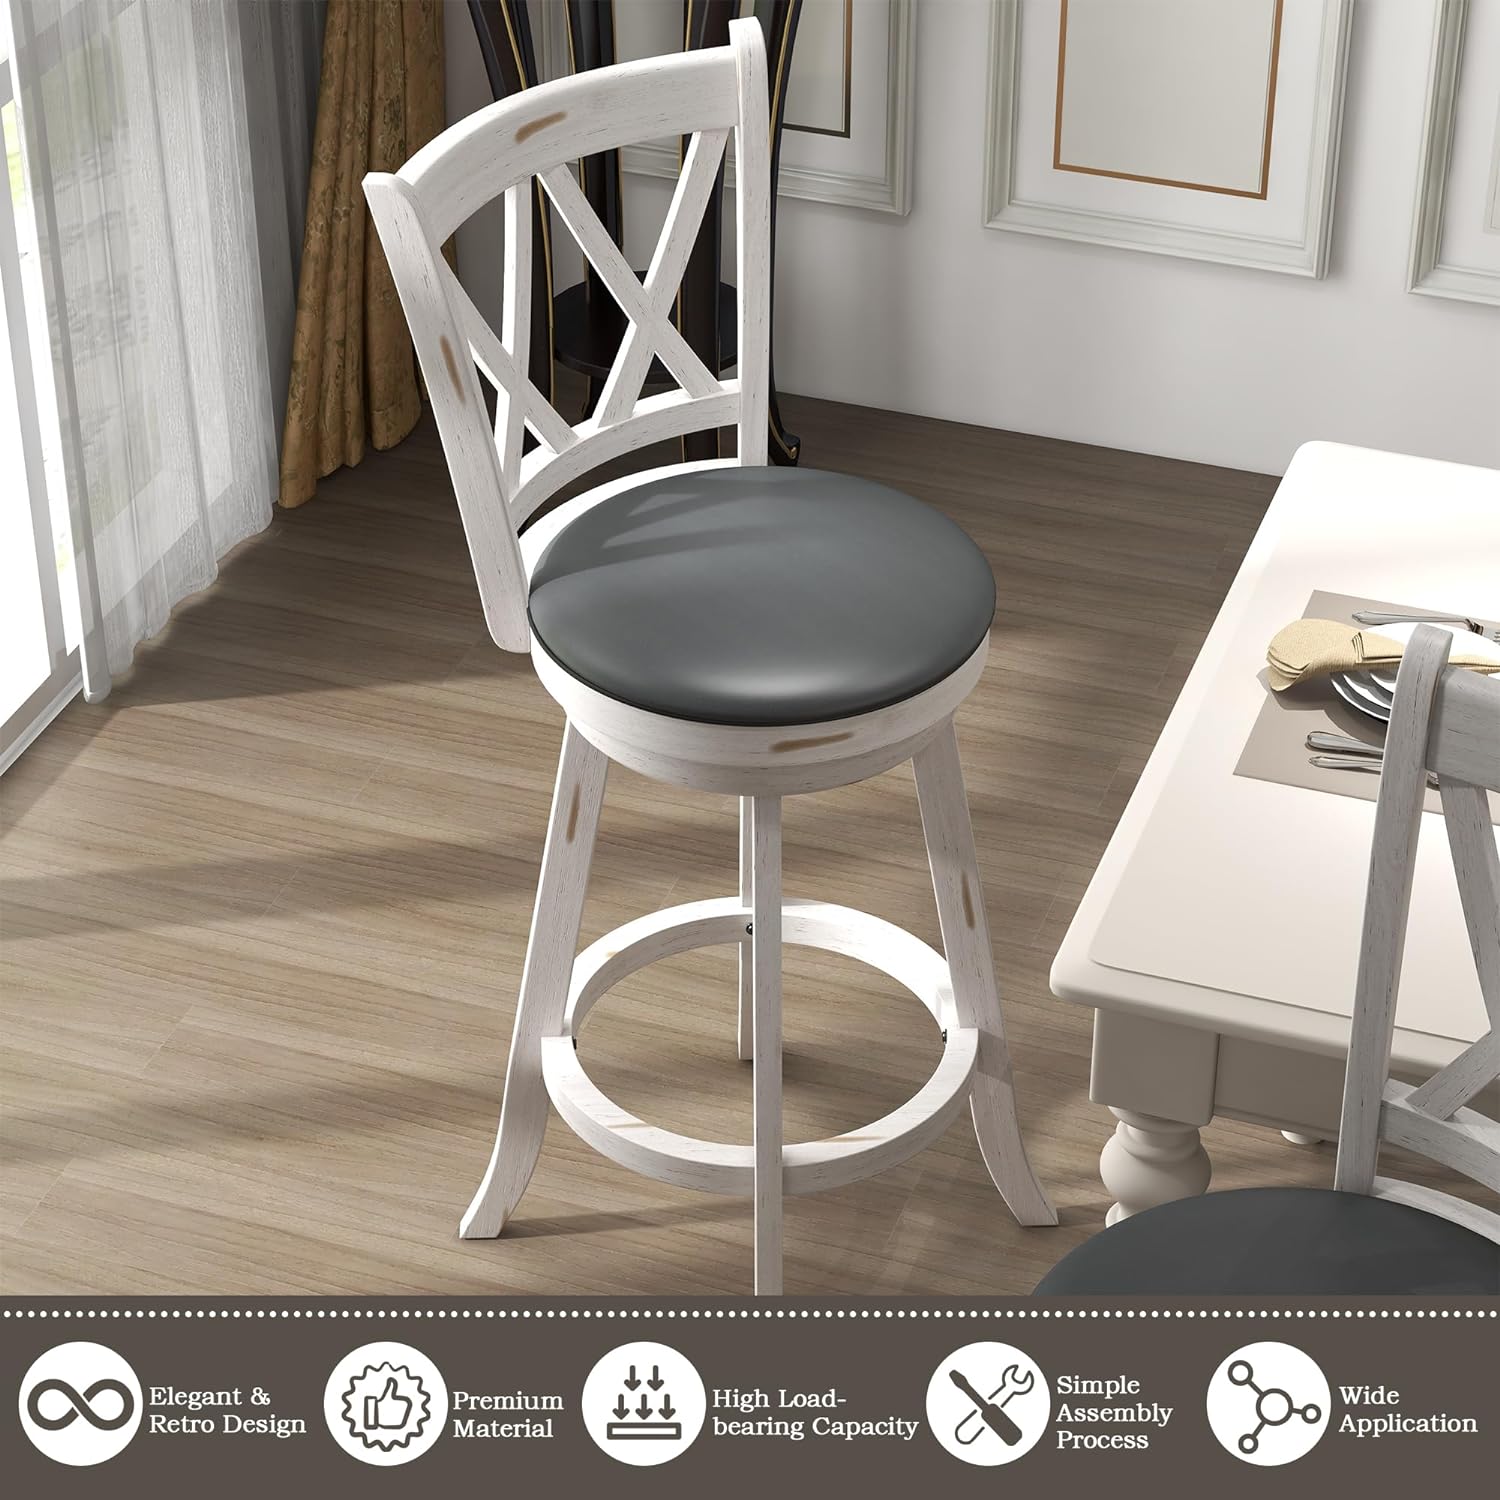 Tolead 2 Piece 29" Swivel Bar Stools with Double X-Back, Upholstered 360 Degree Swivel Dining Chair with PVC Cushioned Seat, White - image 3 of 7